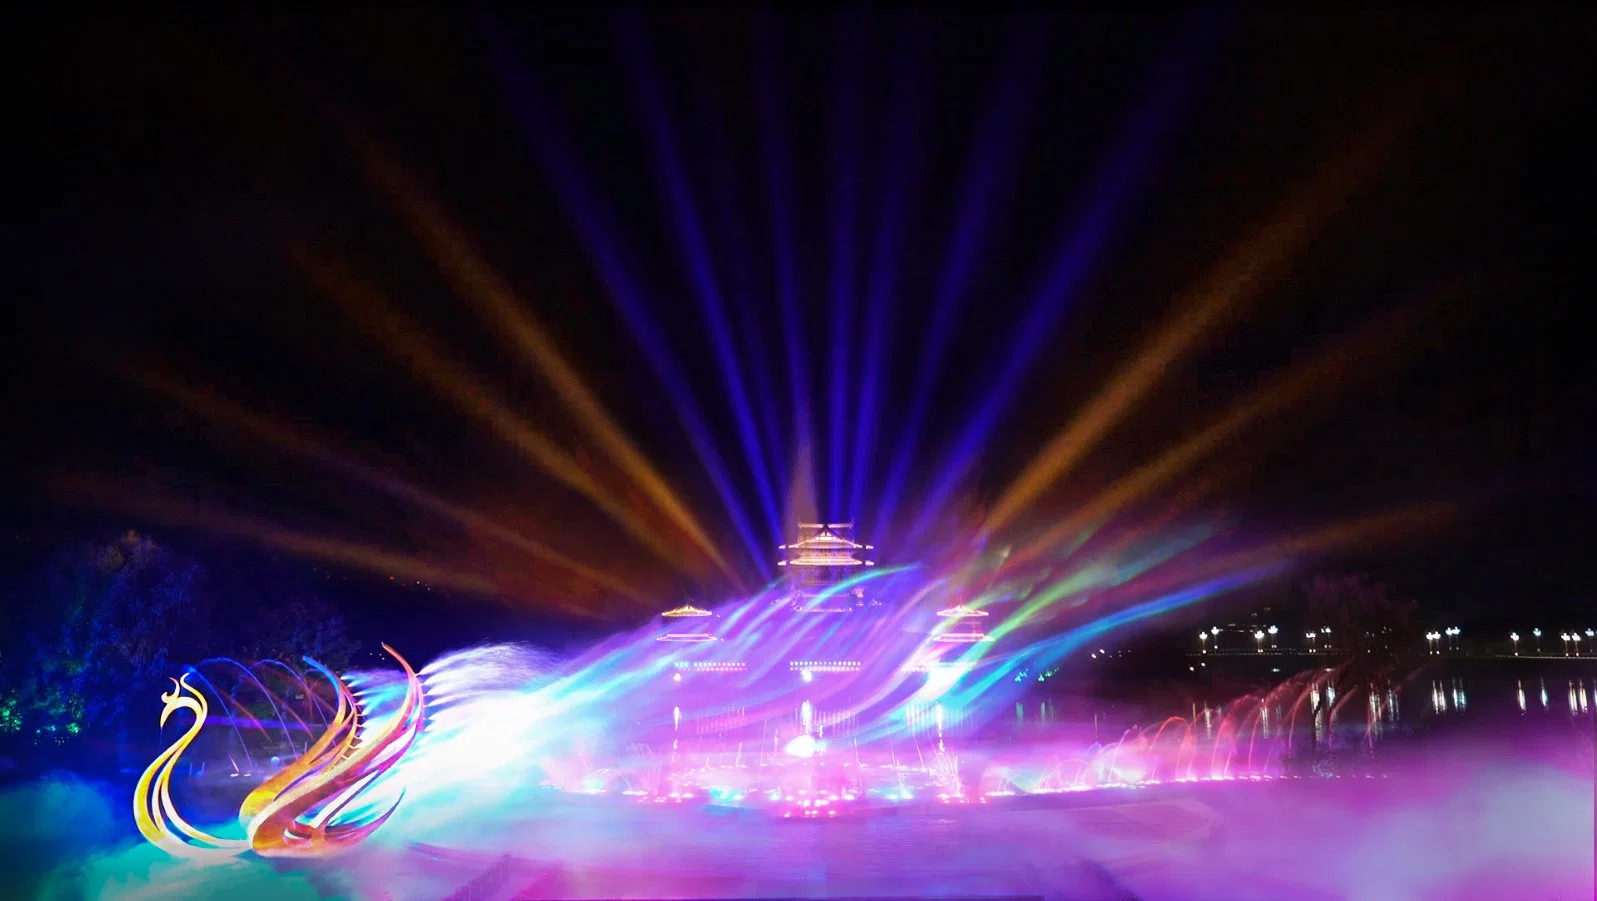 Night Time Tour Water Music Fountain Show with Lasers Beam Light Actors Amazing Water Show Performance Indoor and Outdoor